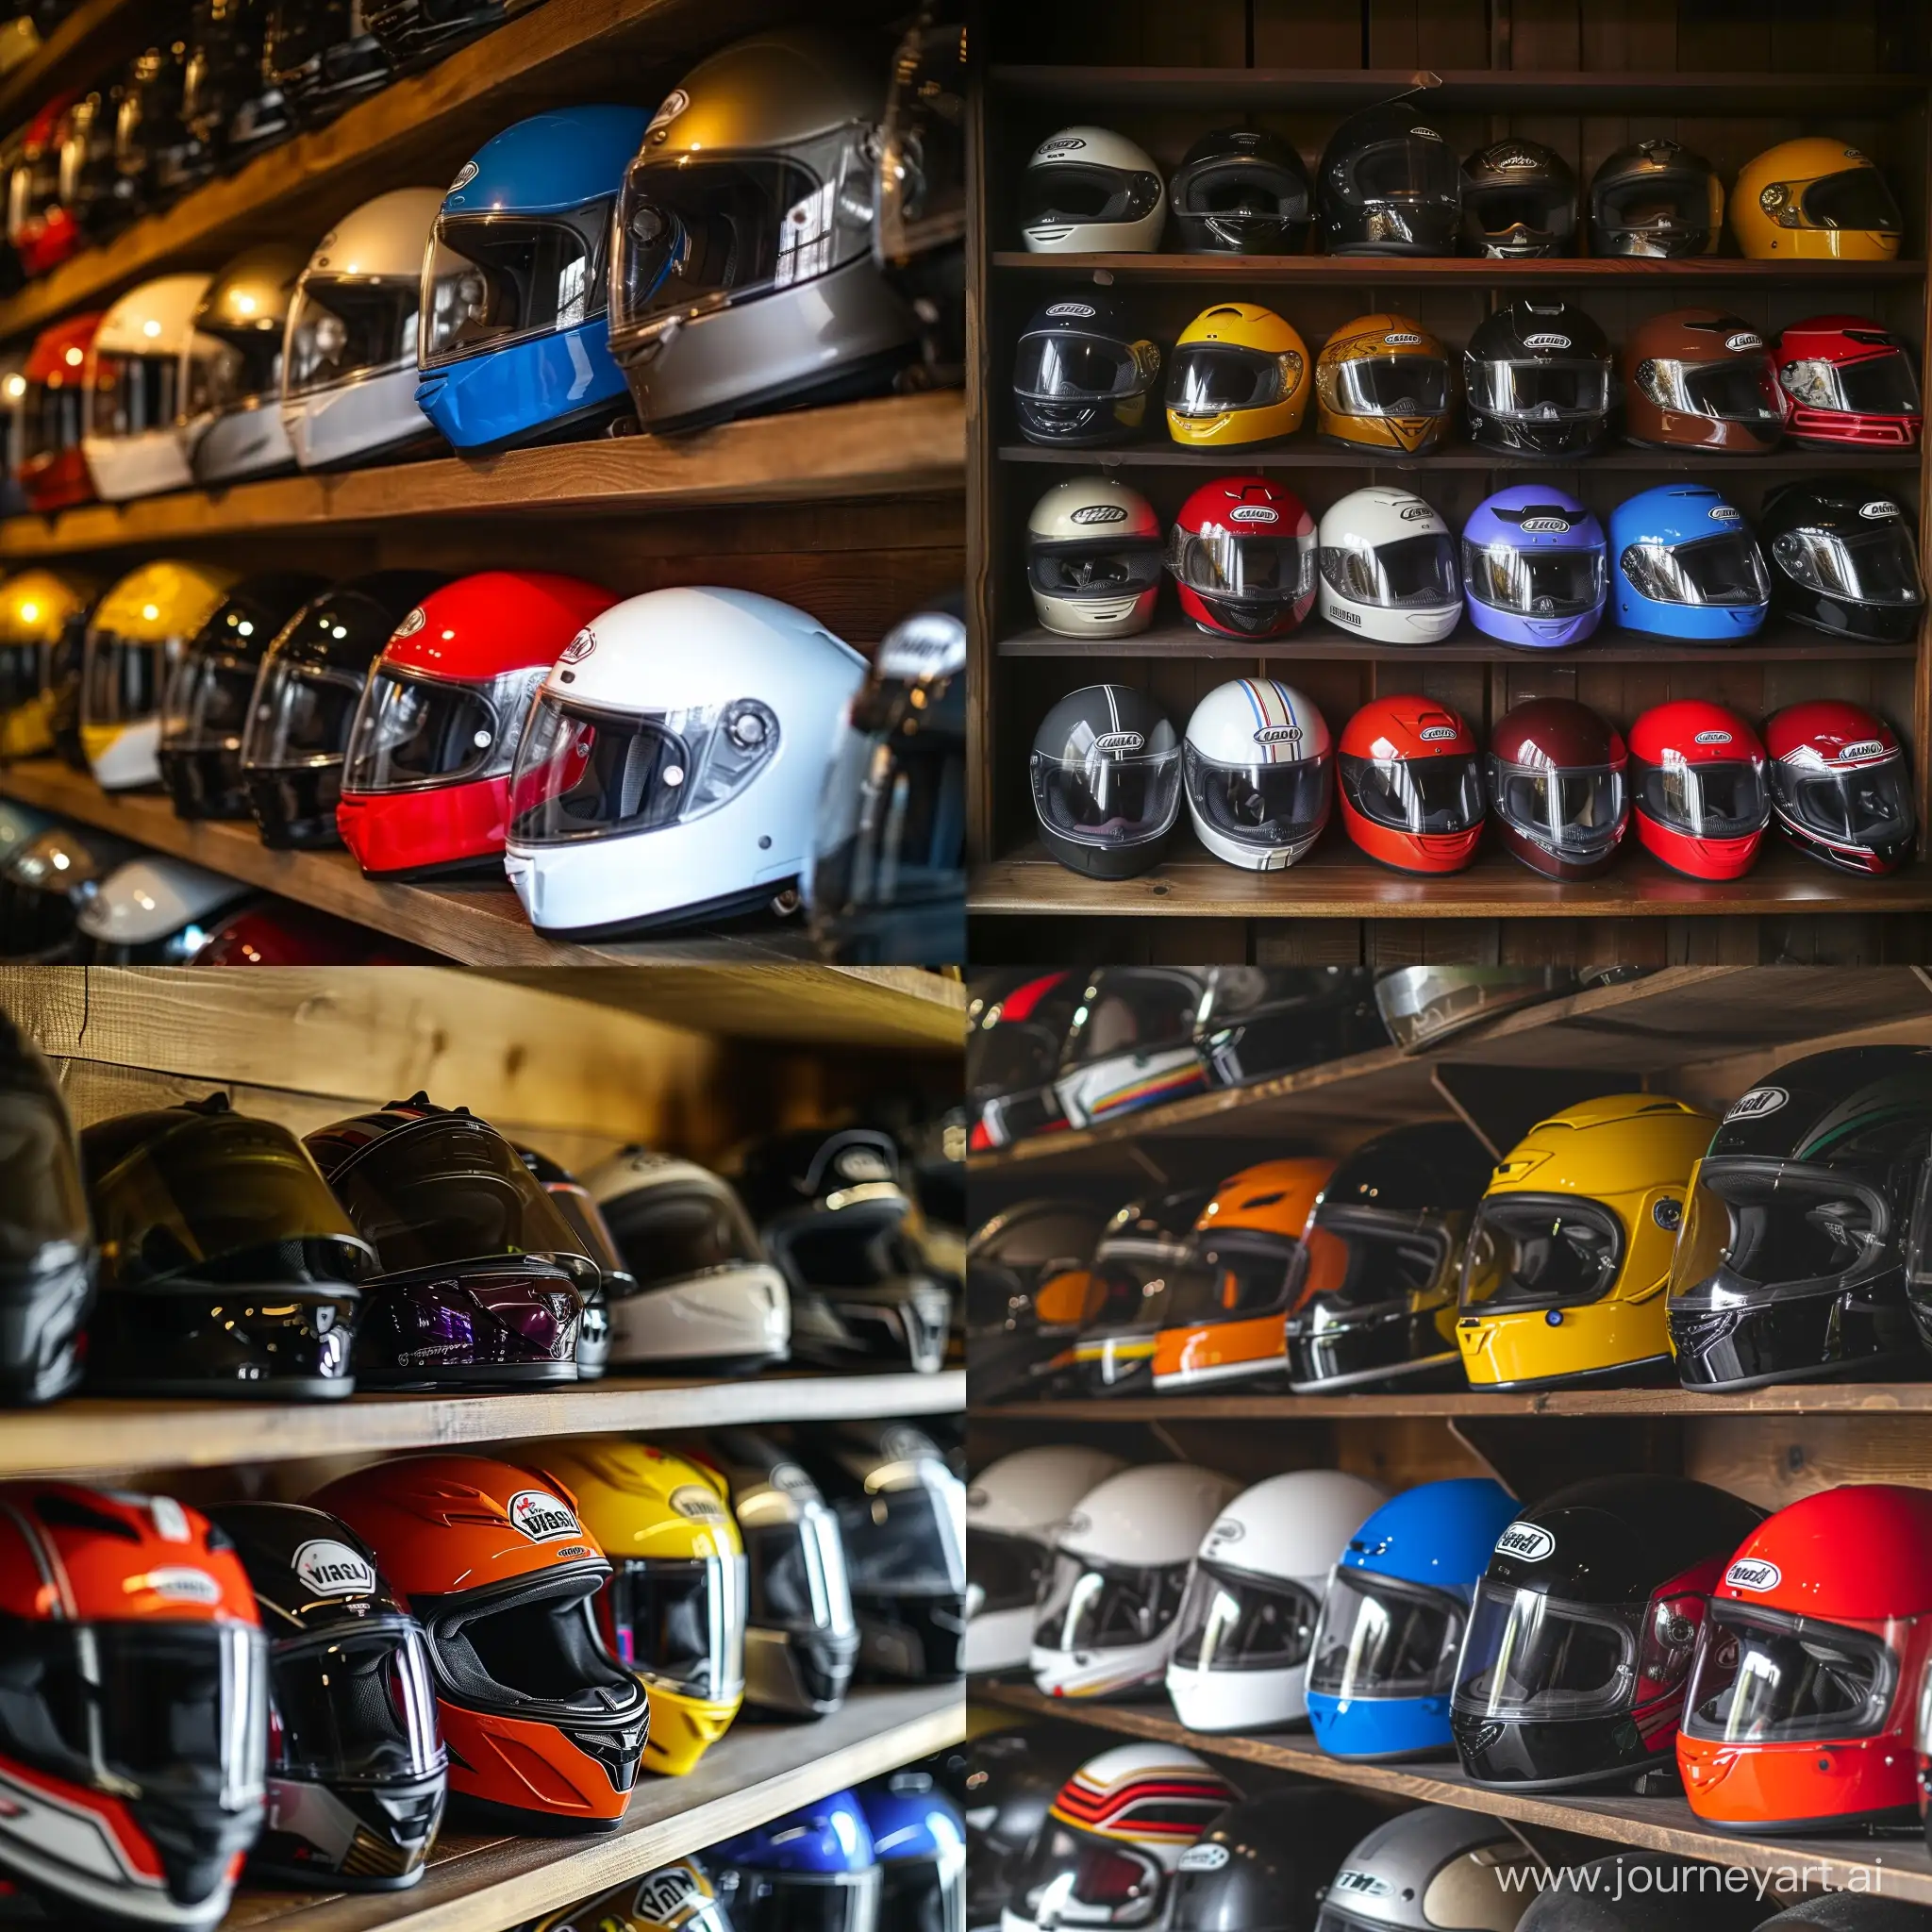 VintageStyled-Motorcycle-Helmets-Displayed-in-an-Array-of-Colors